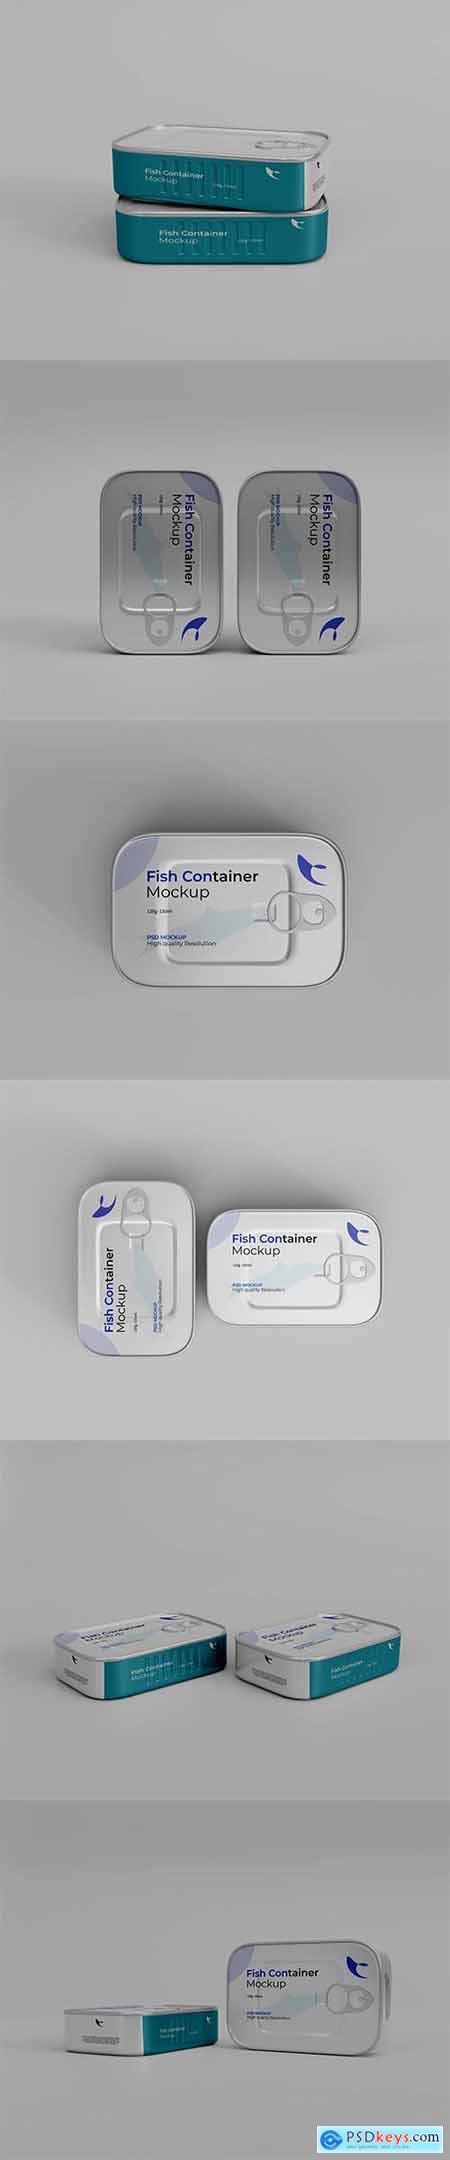 Fish container mockup